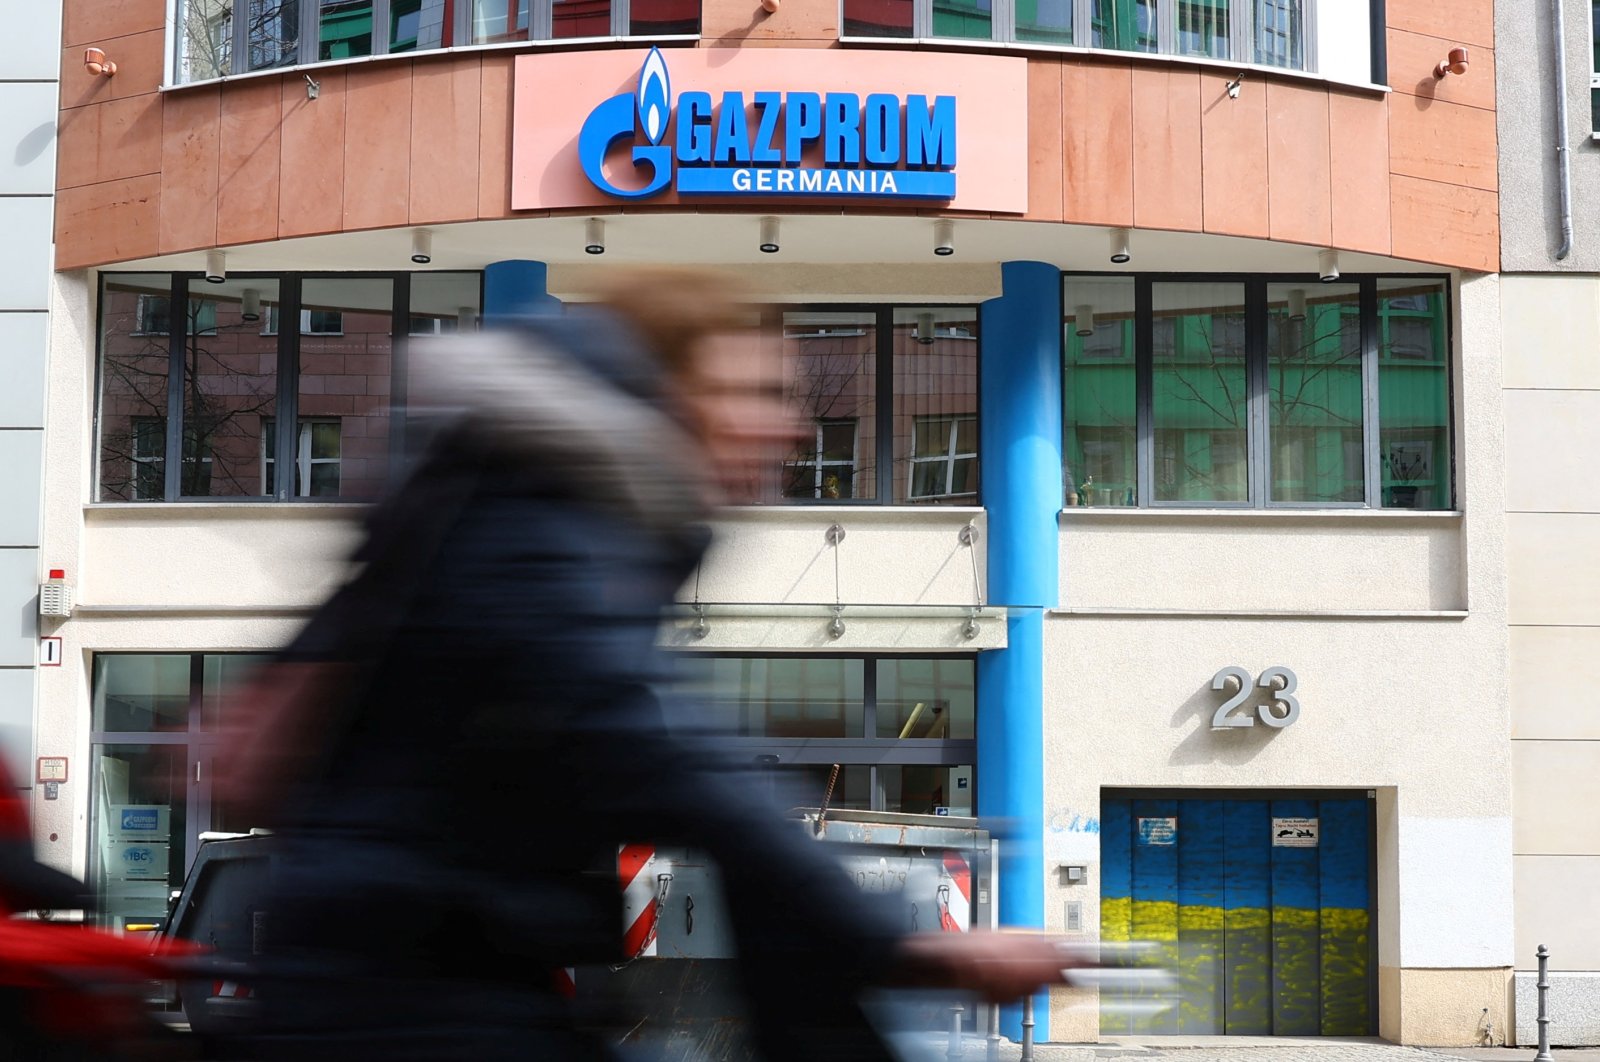 A cyclist passes the headquarters of Gazprom Germania, in Berlin, Germany, April 1, 2022. (Reuters Photo)